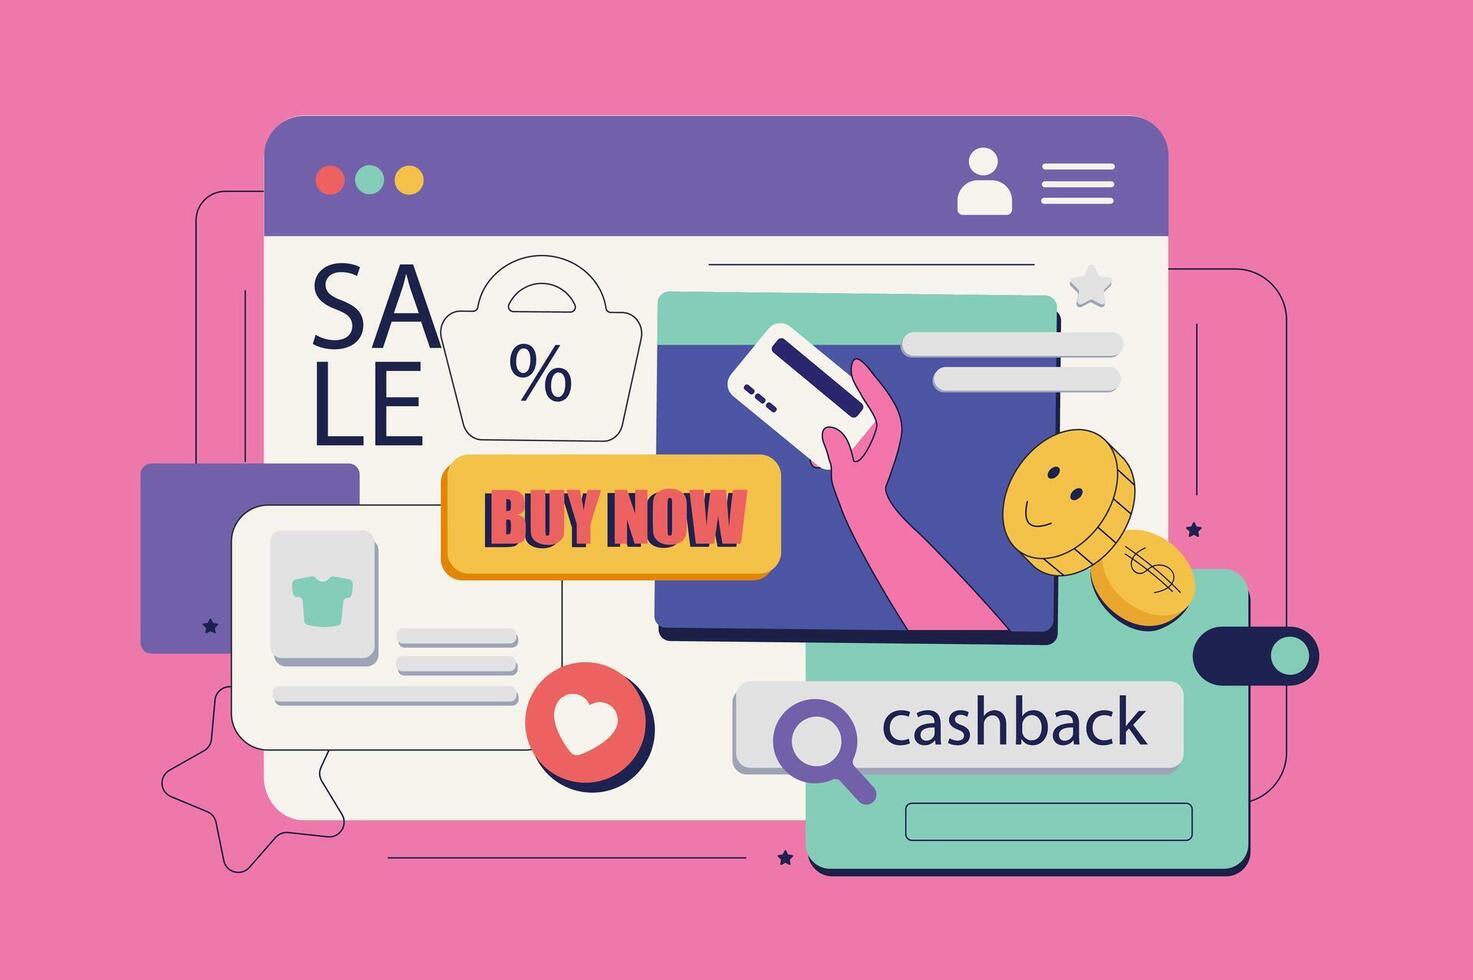 Commerce concept in flat neo brutalism design for web. Online shopping at sale, ordering goods with credit card payment at webpage. Vector illustration for social media banner, marketing material.